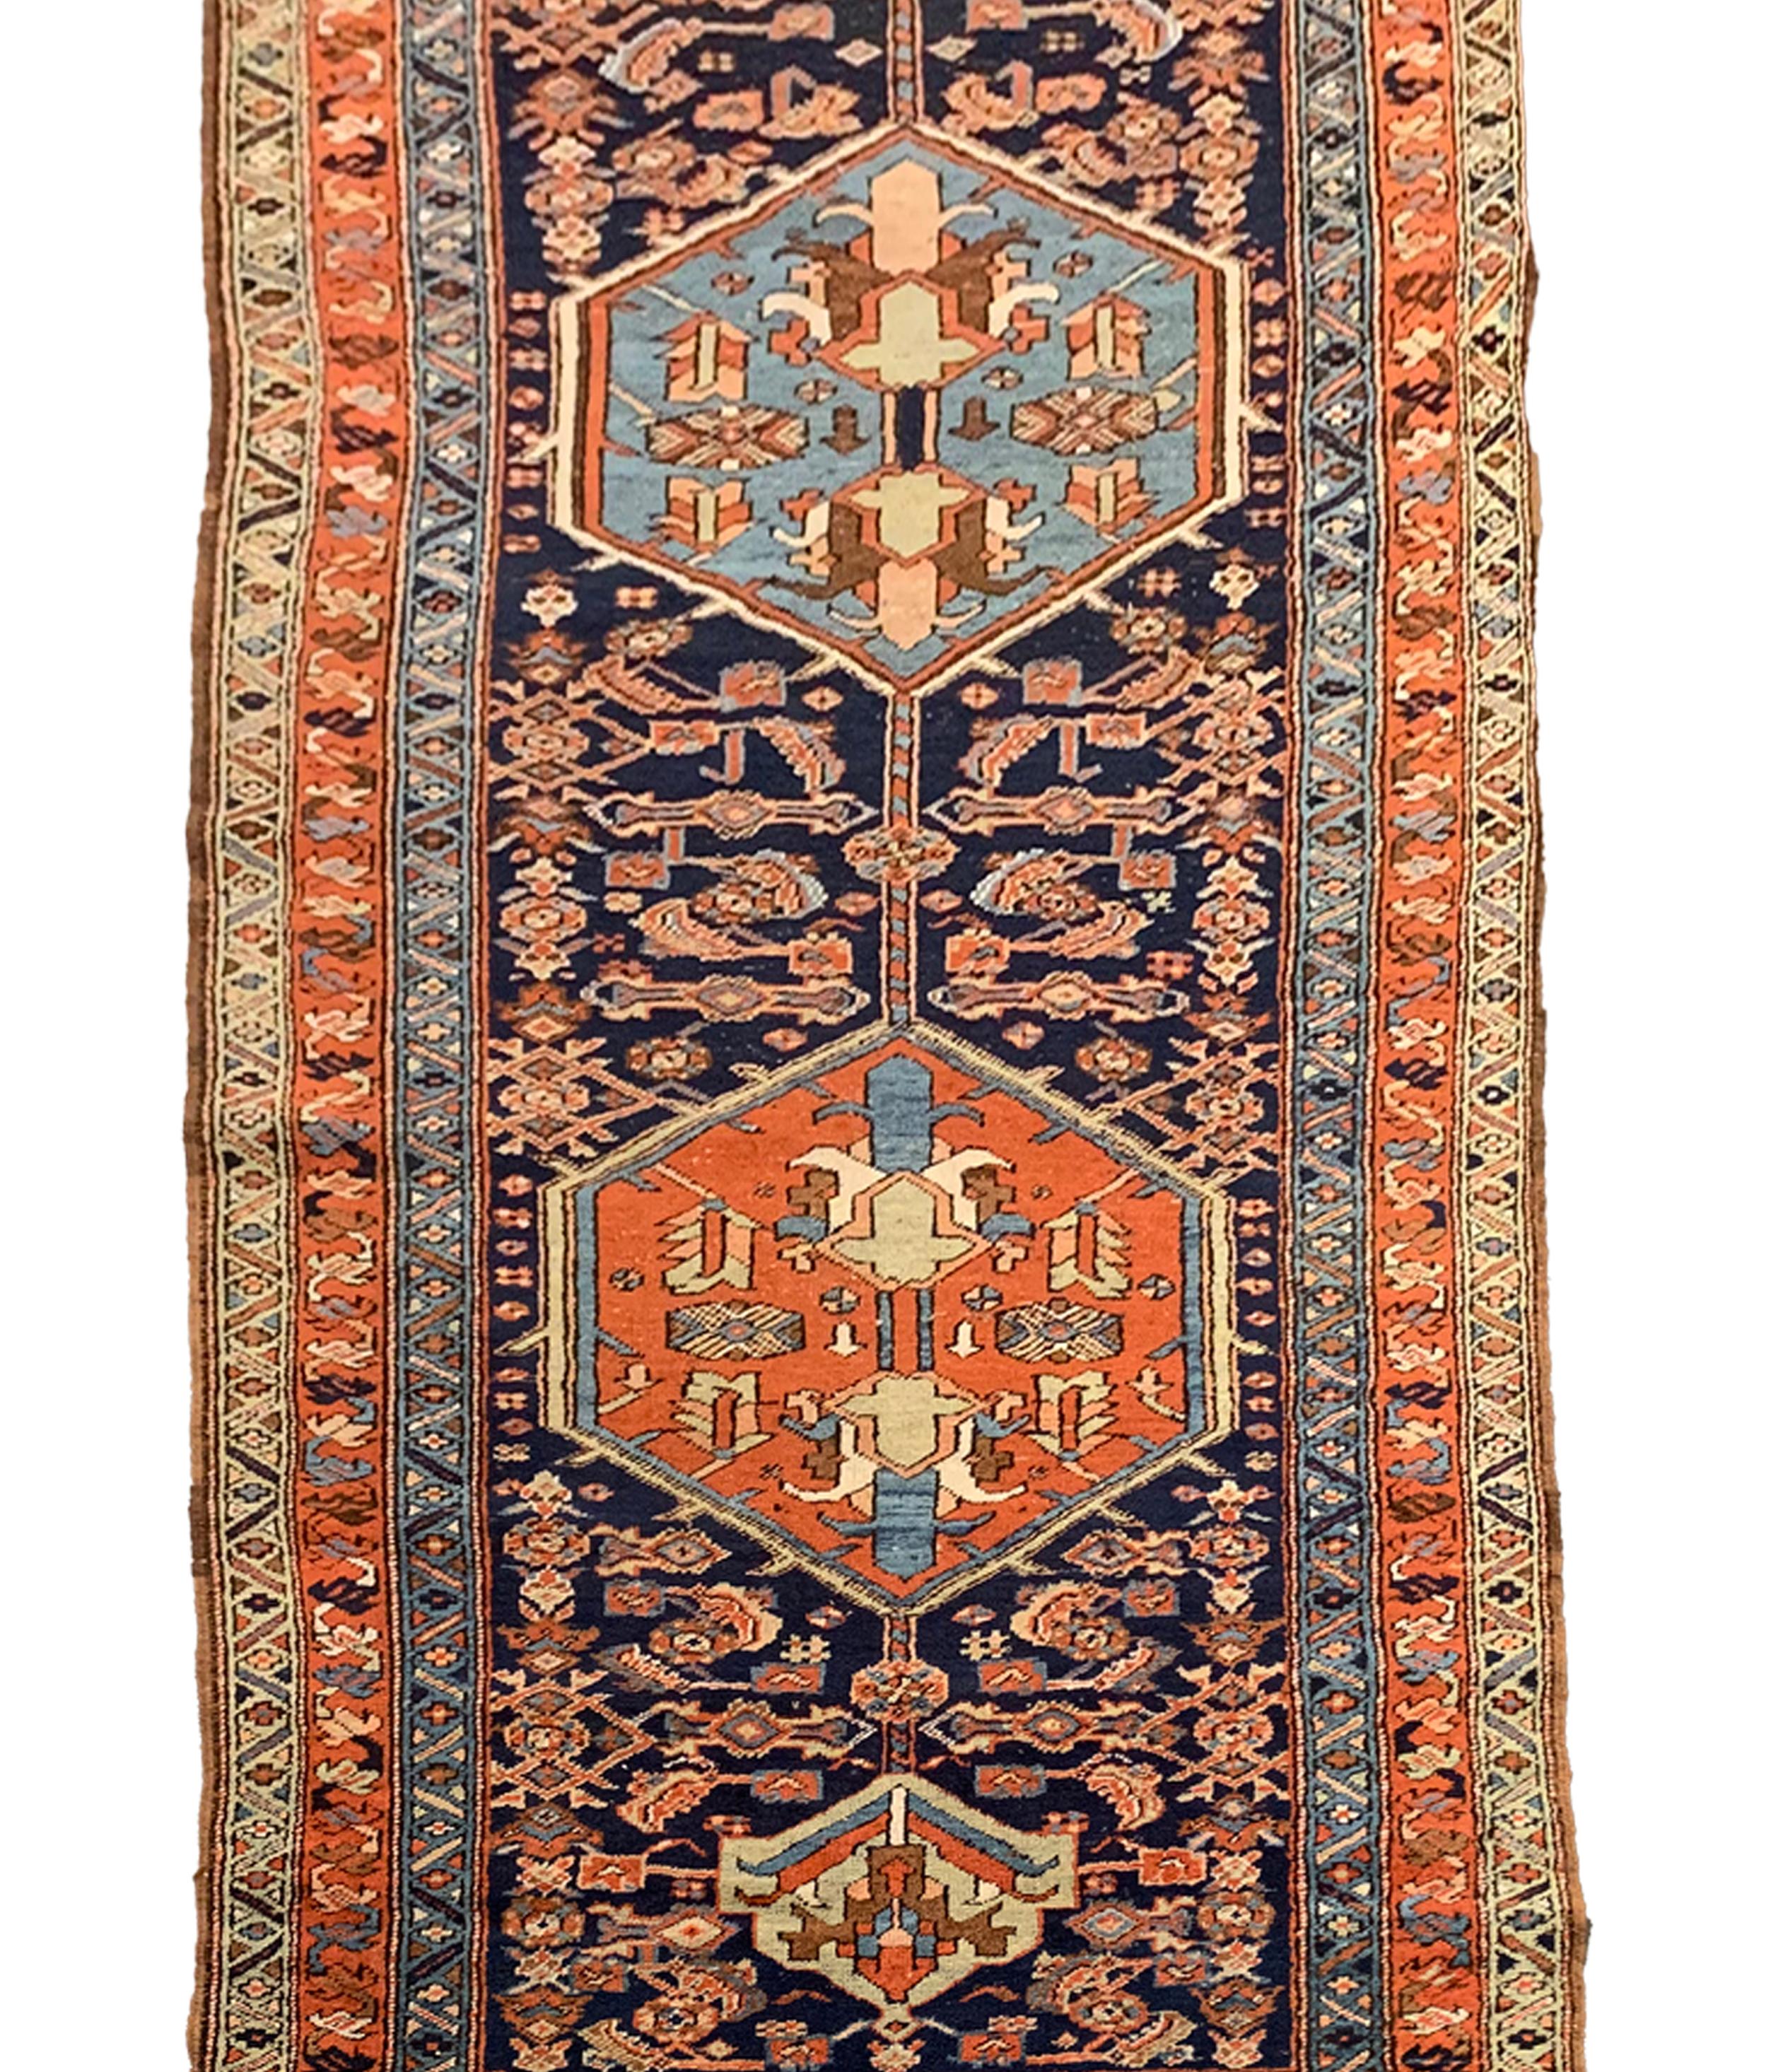 This antique rug runner fine wool runner rug is a handmade vintage piece featuring a tribal design. The central pattern features five geometric medallions woven in blue and rust accent colours with intricate details. The colour palette and tribal